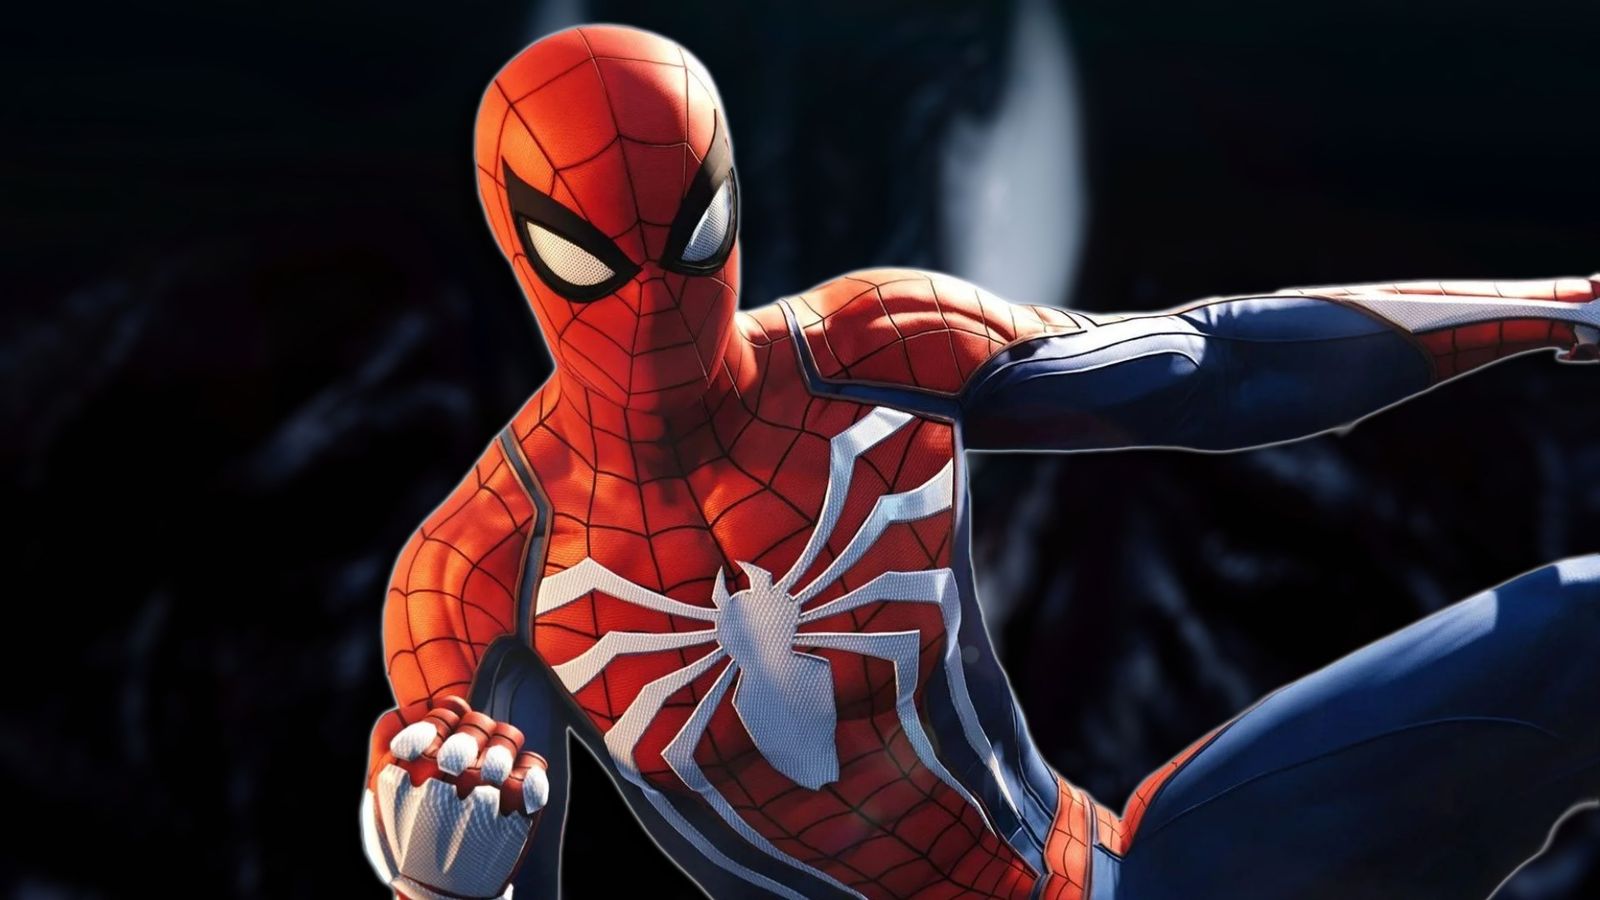 marvel spider-man 2 has wrapped up motion capture and voice recording